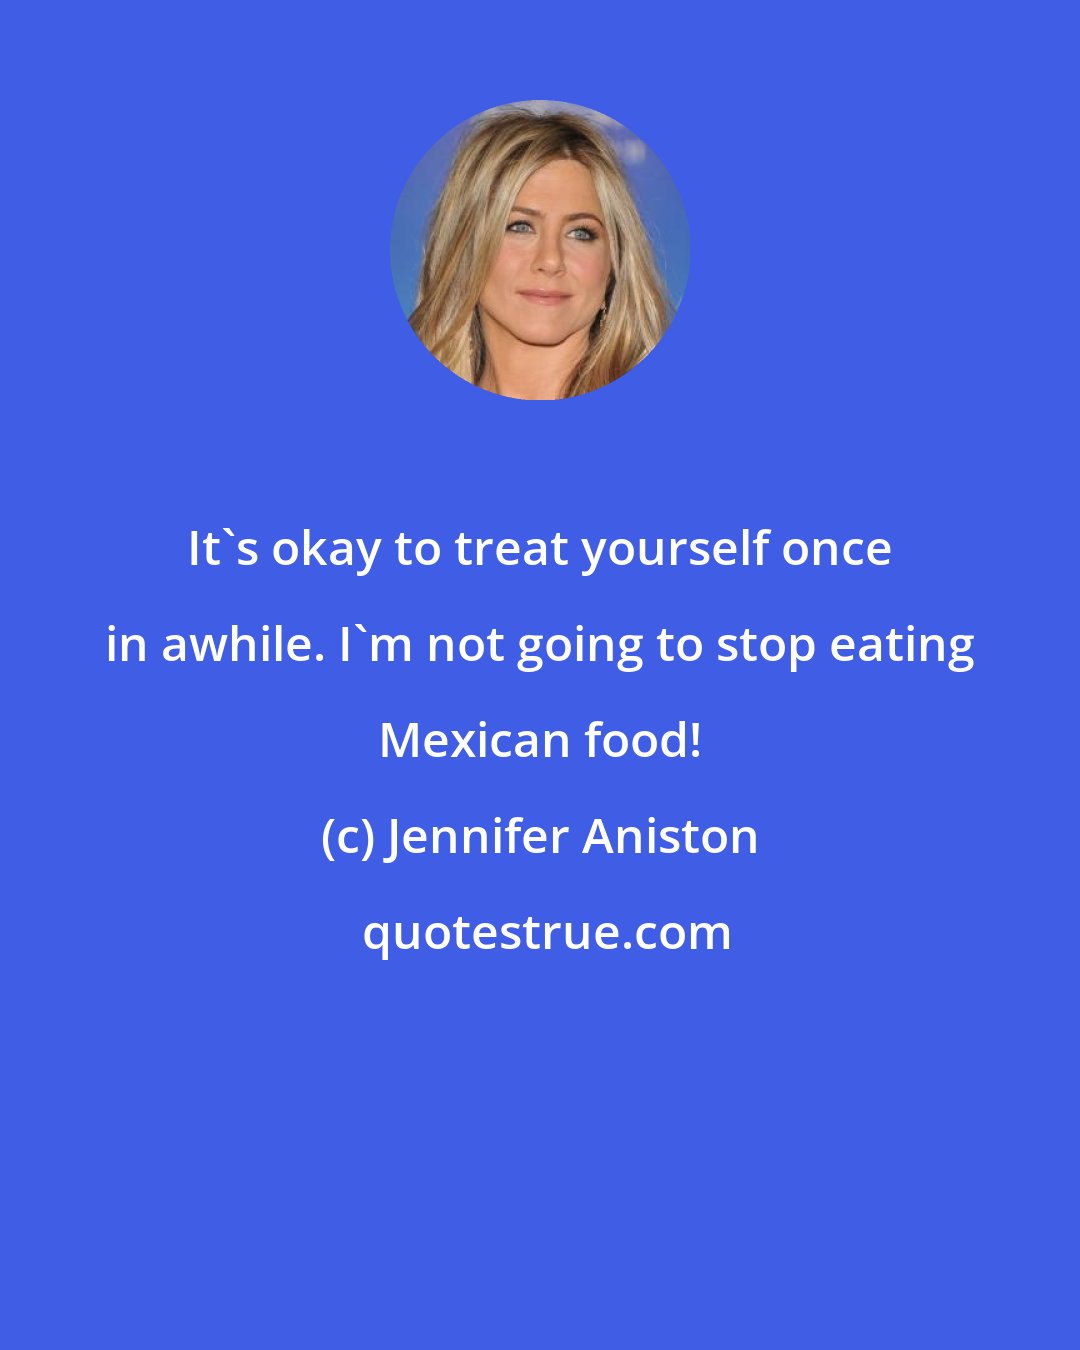 Jennifer Aniston: It's okay to treat yourself once in awhile. I'm not going to stop eating Mexican food!